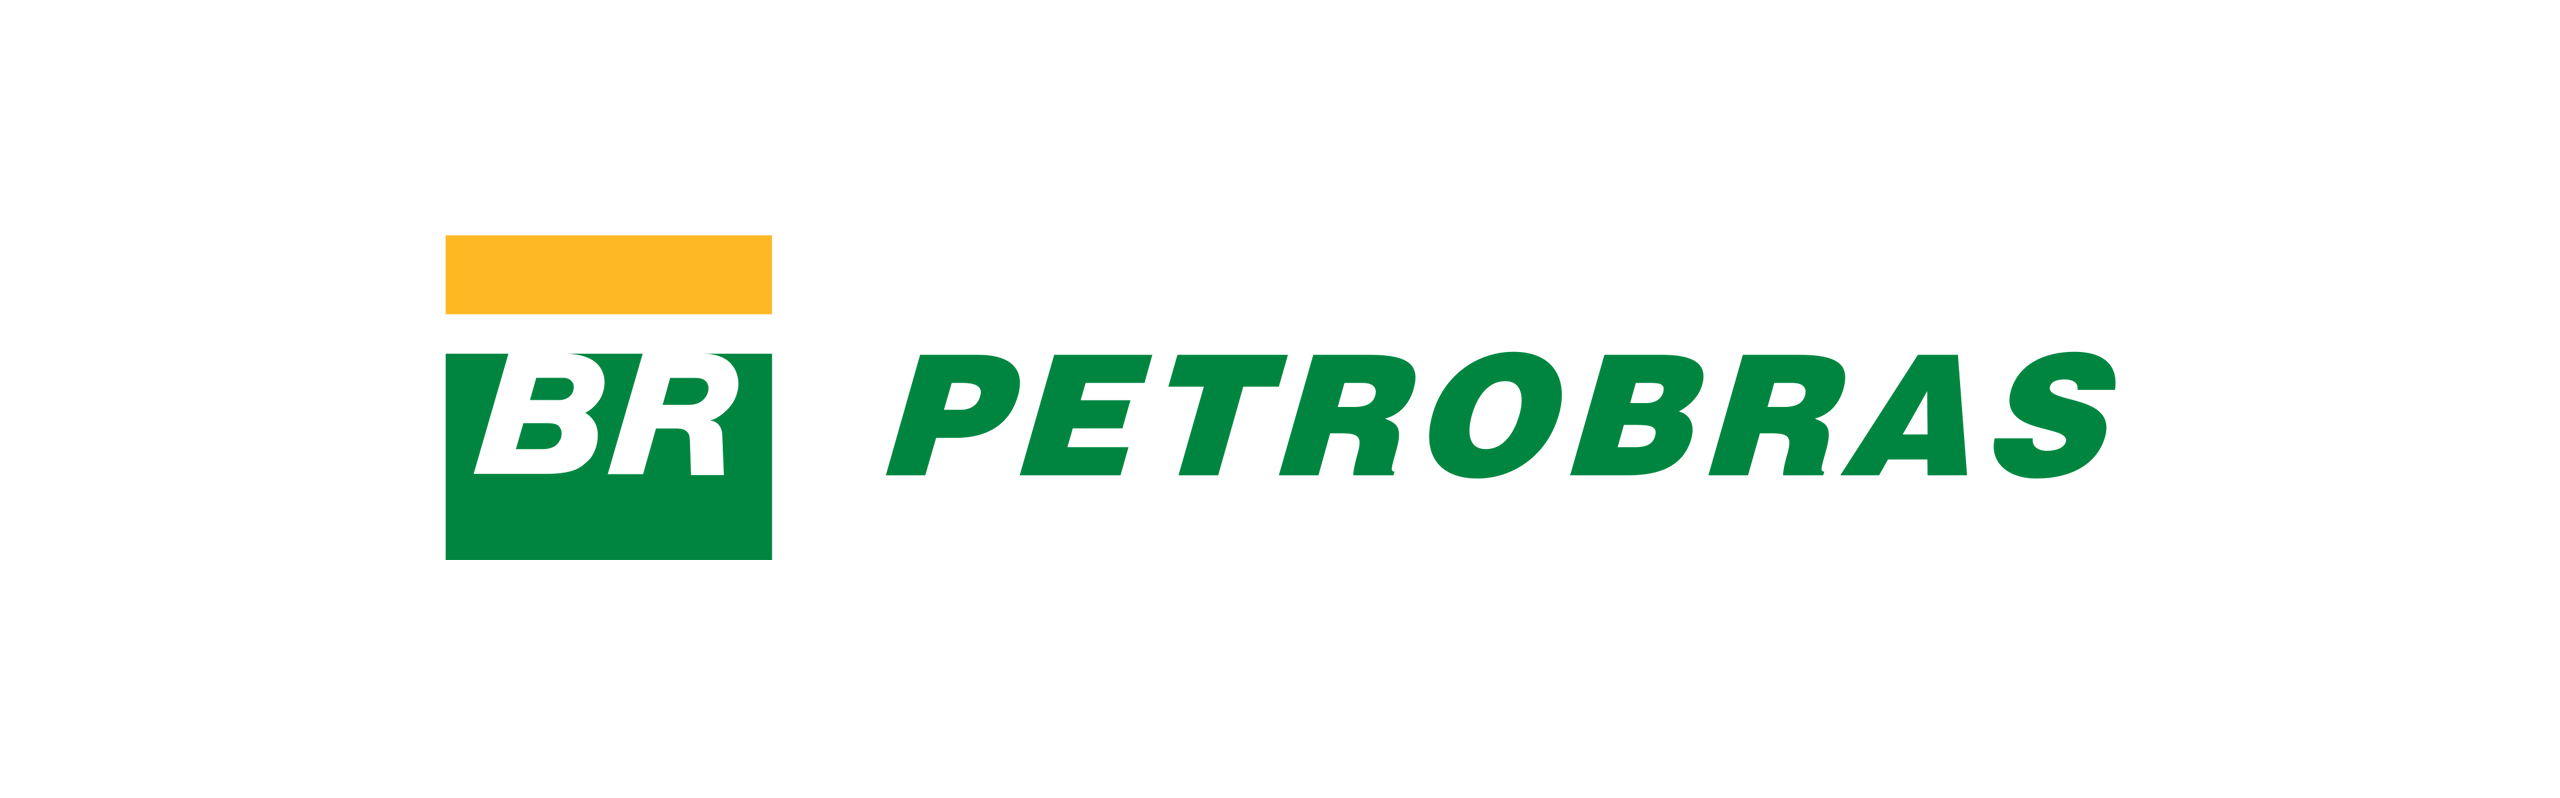 Investments of $102B on Petrobras’ 5-Year Agenda: Oil & Gas Getting the Lion’s Share While $11.5B Goes to Low-Carbon Projects